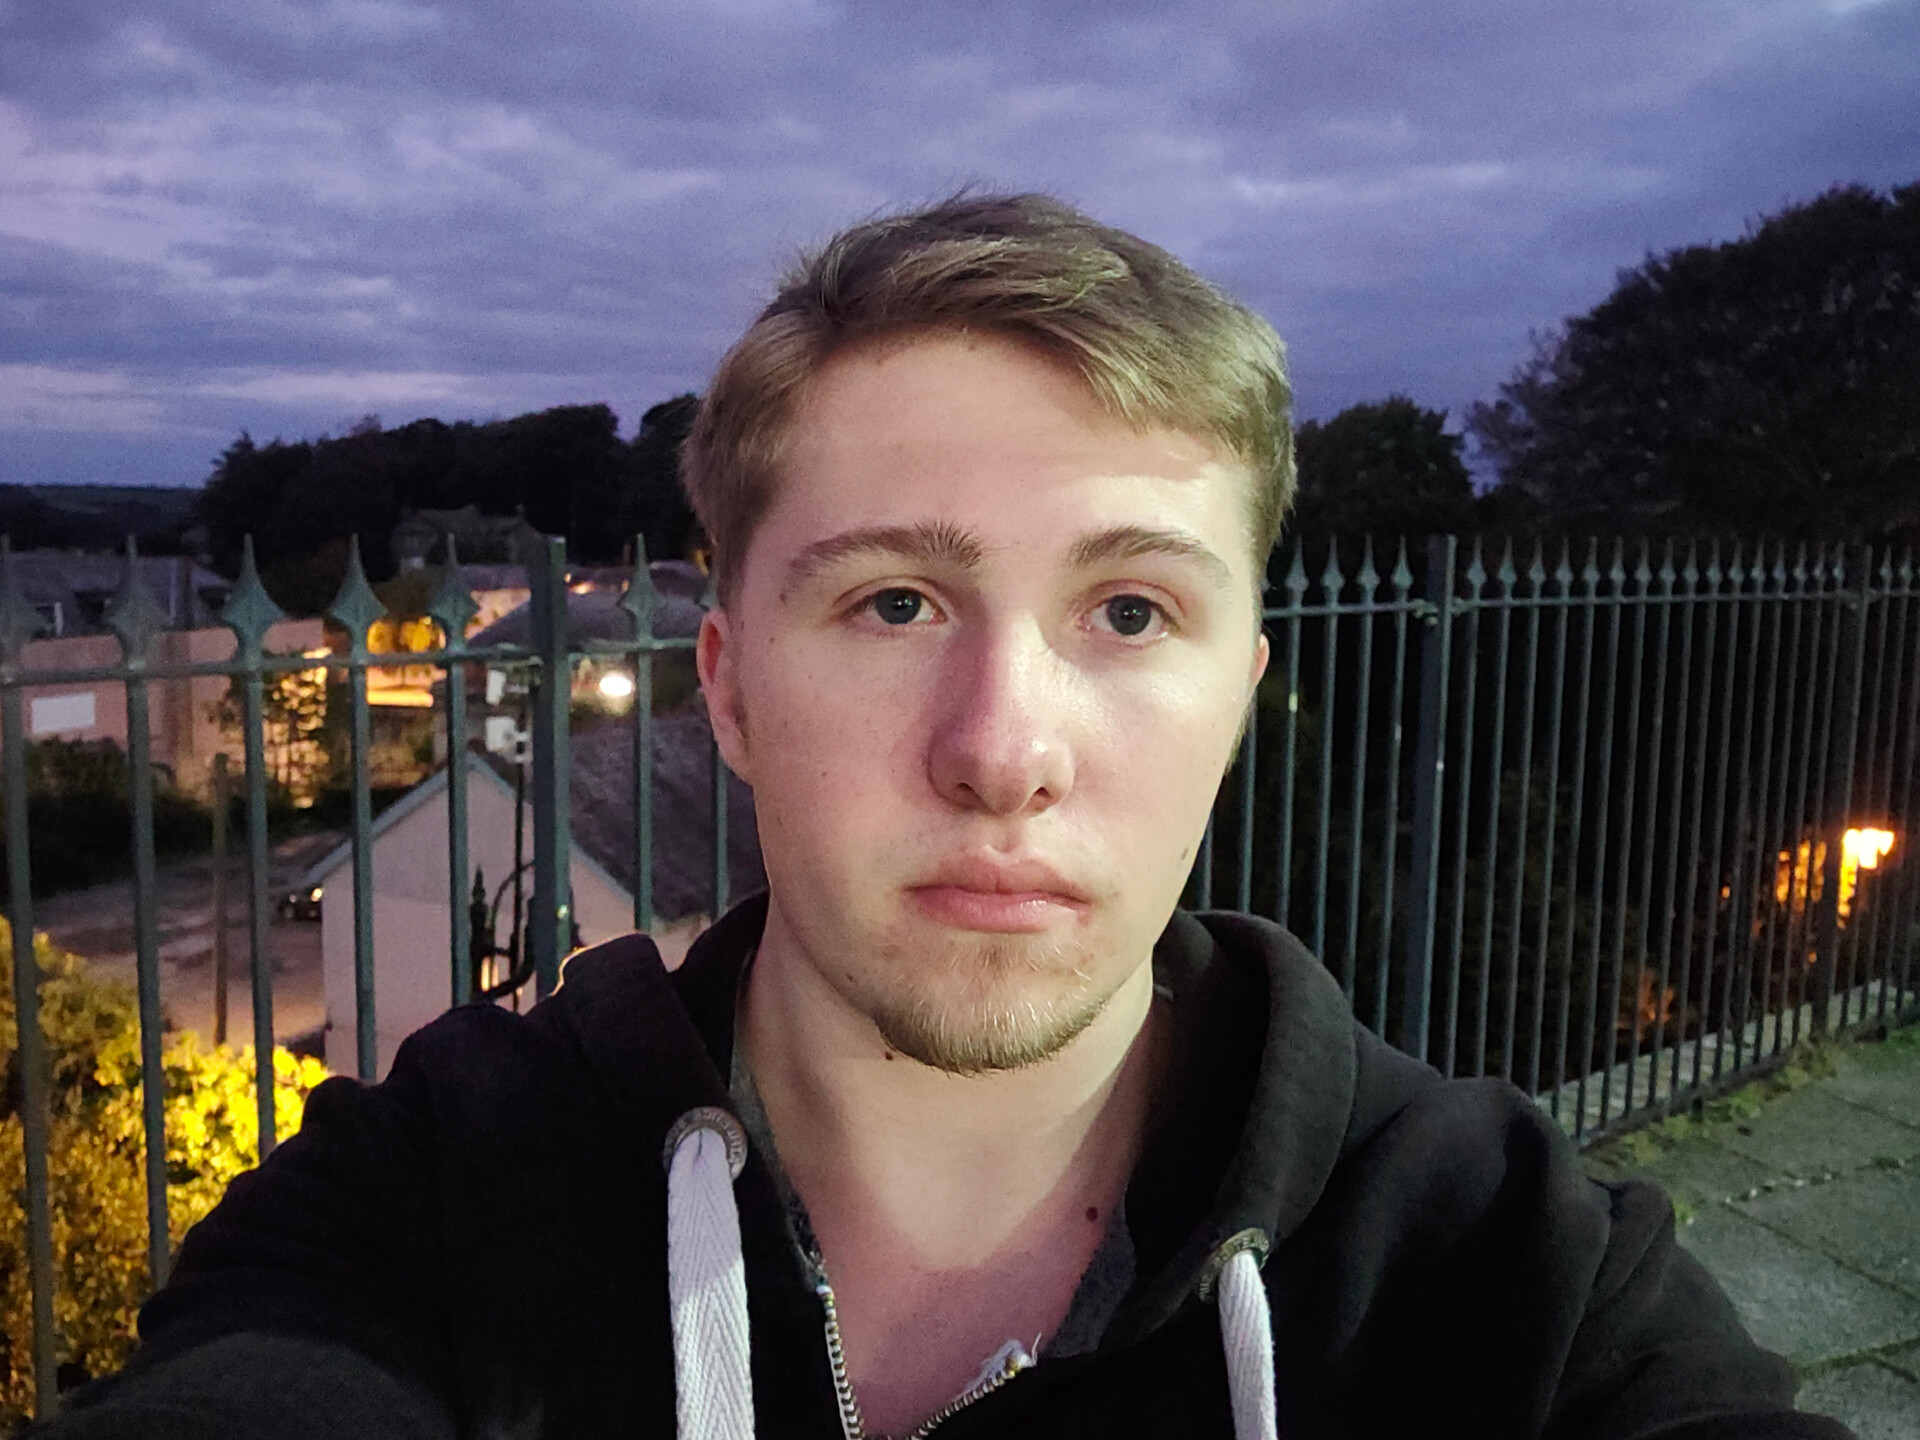 Realme 5 Pro Selfie at station overlooking town